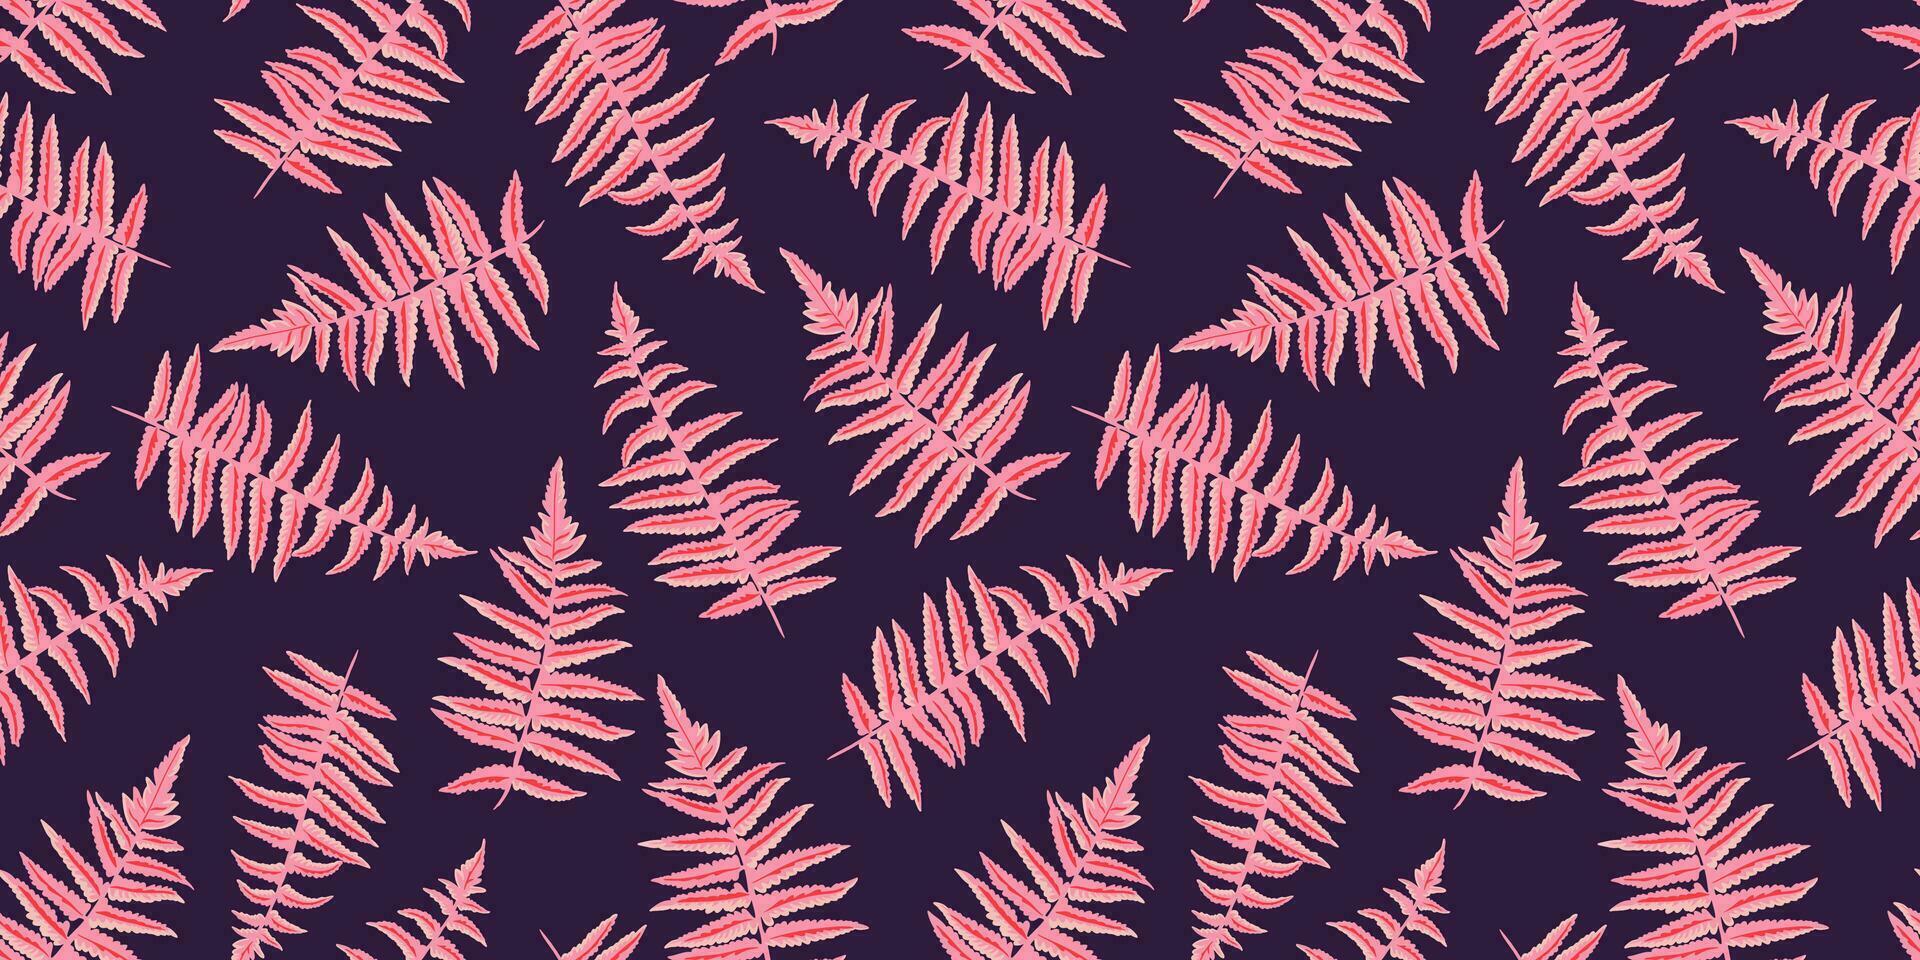 Seamless simple pink shape leaves fern pattern. Vector hand drawn abstract, artistic, silhouette leaf stems print. Template for design, fabric, interior decor, textile, fabric, wallpaper